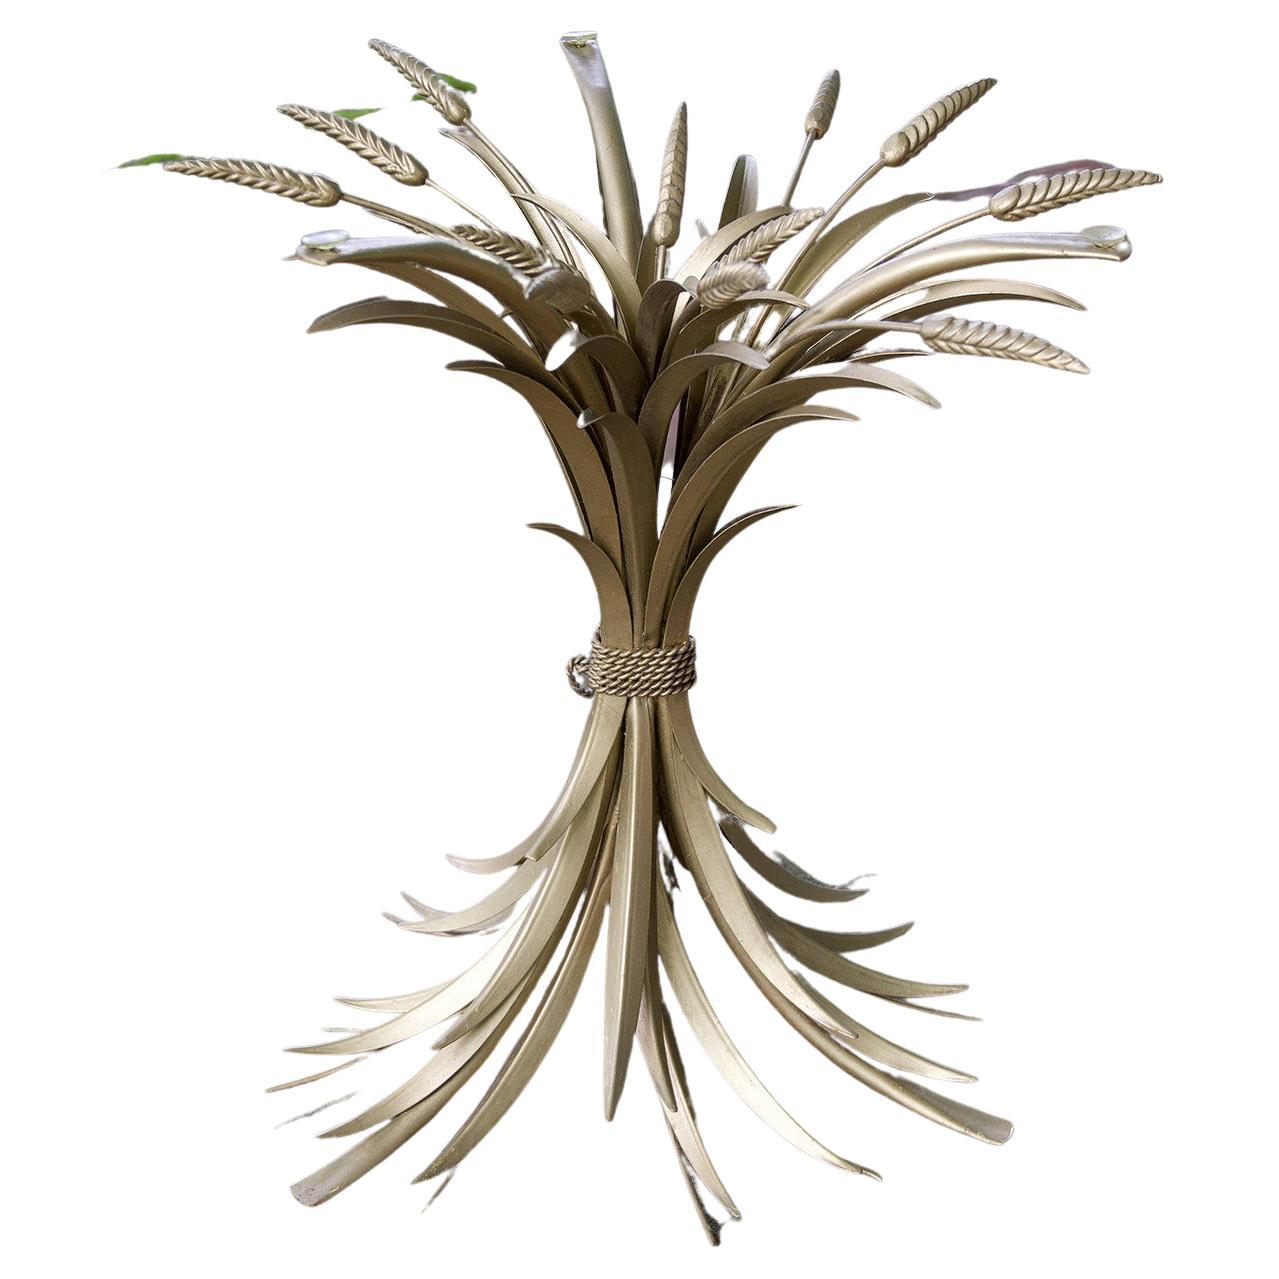 An occasional table in the Hollywood Regency style, the gilded brass base in the form of a stylized sheaf of wheat tied with a cord, the sheaf flared at top and bottom and supporting a circular glass top, American, ca. 1960. Measures: 22 ins. high,